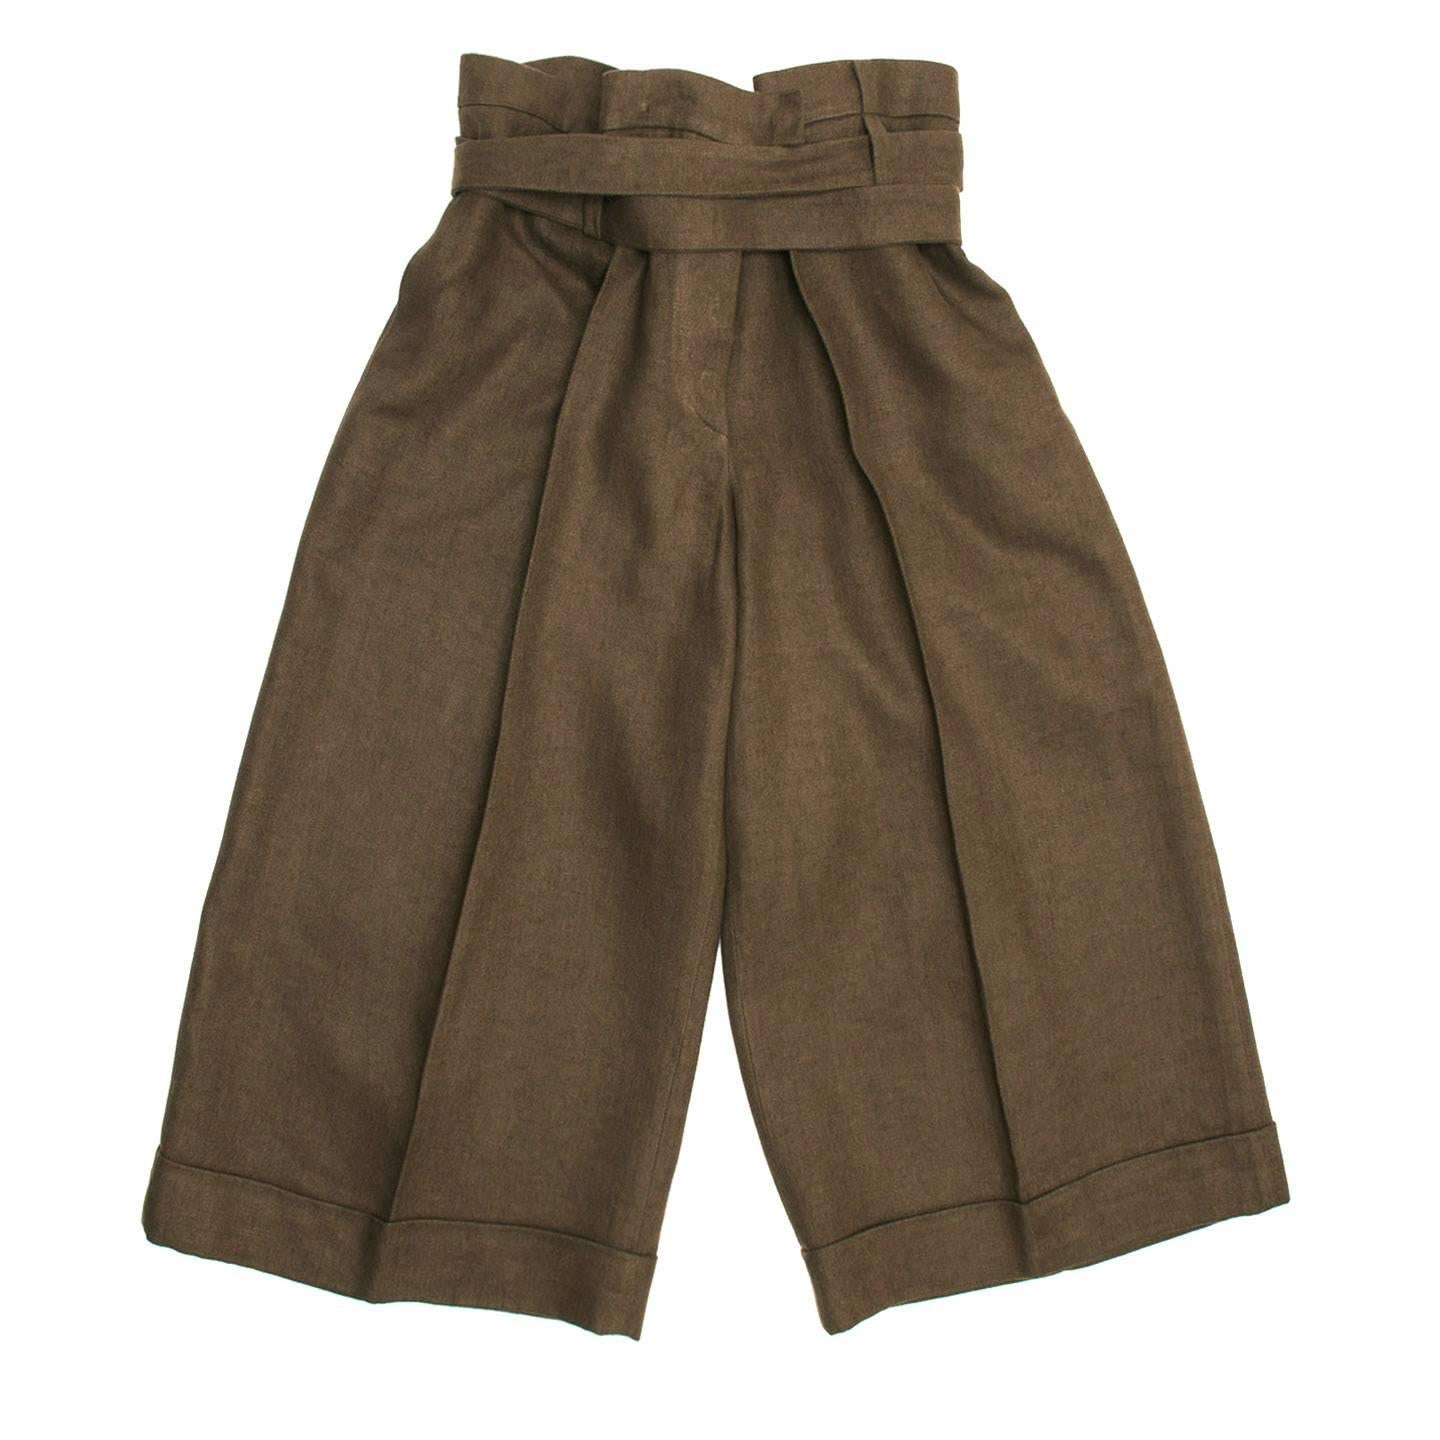 Paper bag color cropped style brown linen pants. The legs are very wide and the hem is finished with a classic turn-up. The back is enriched by two deep pleats fixed on the waist band and the back buckle that extends to form a wide belt. The linen